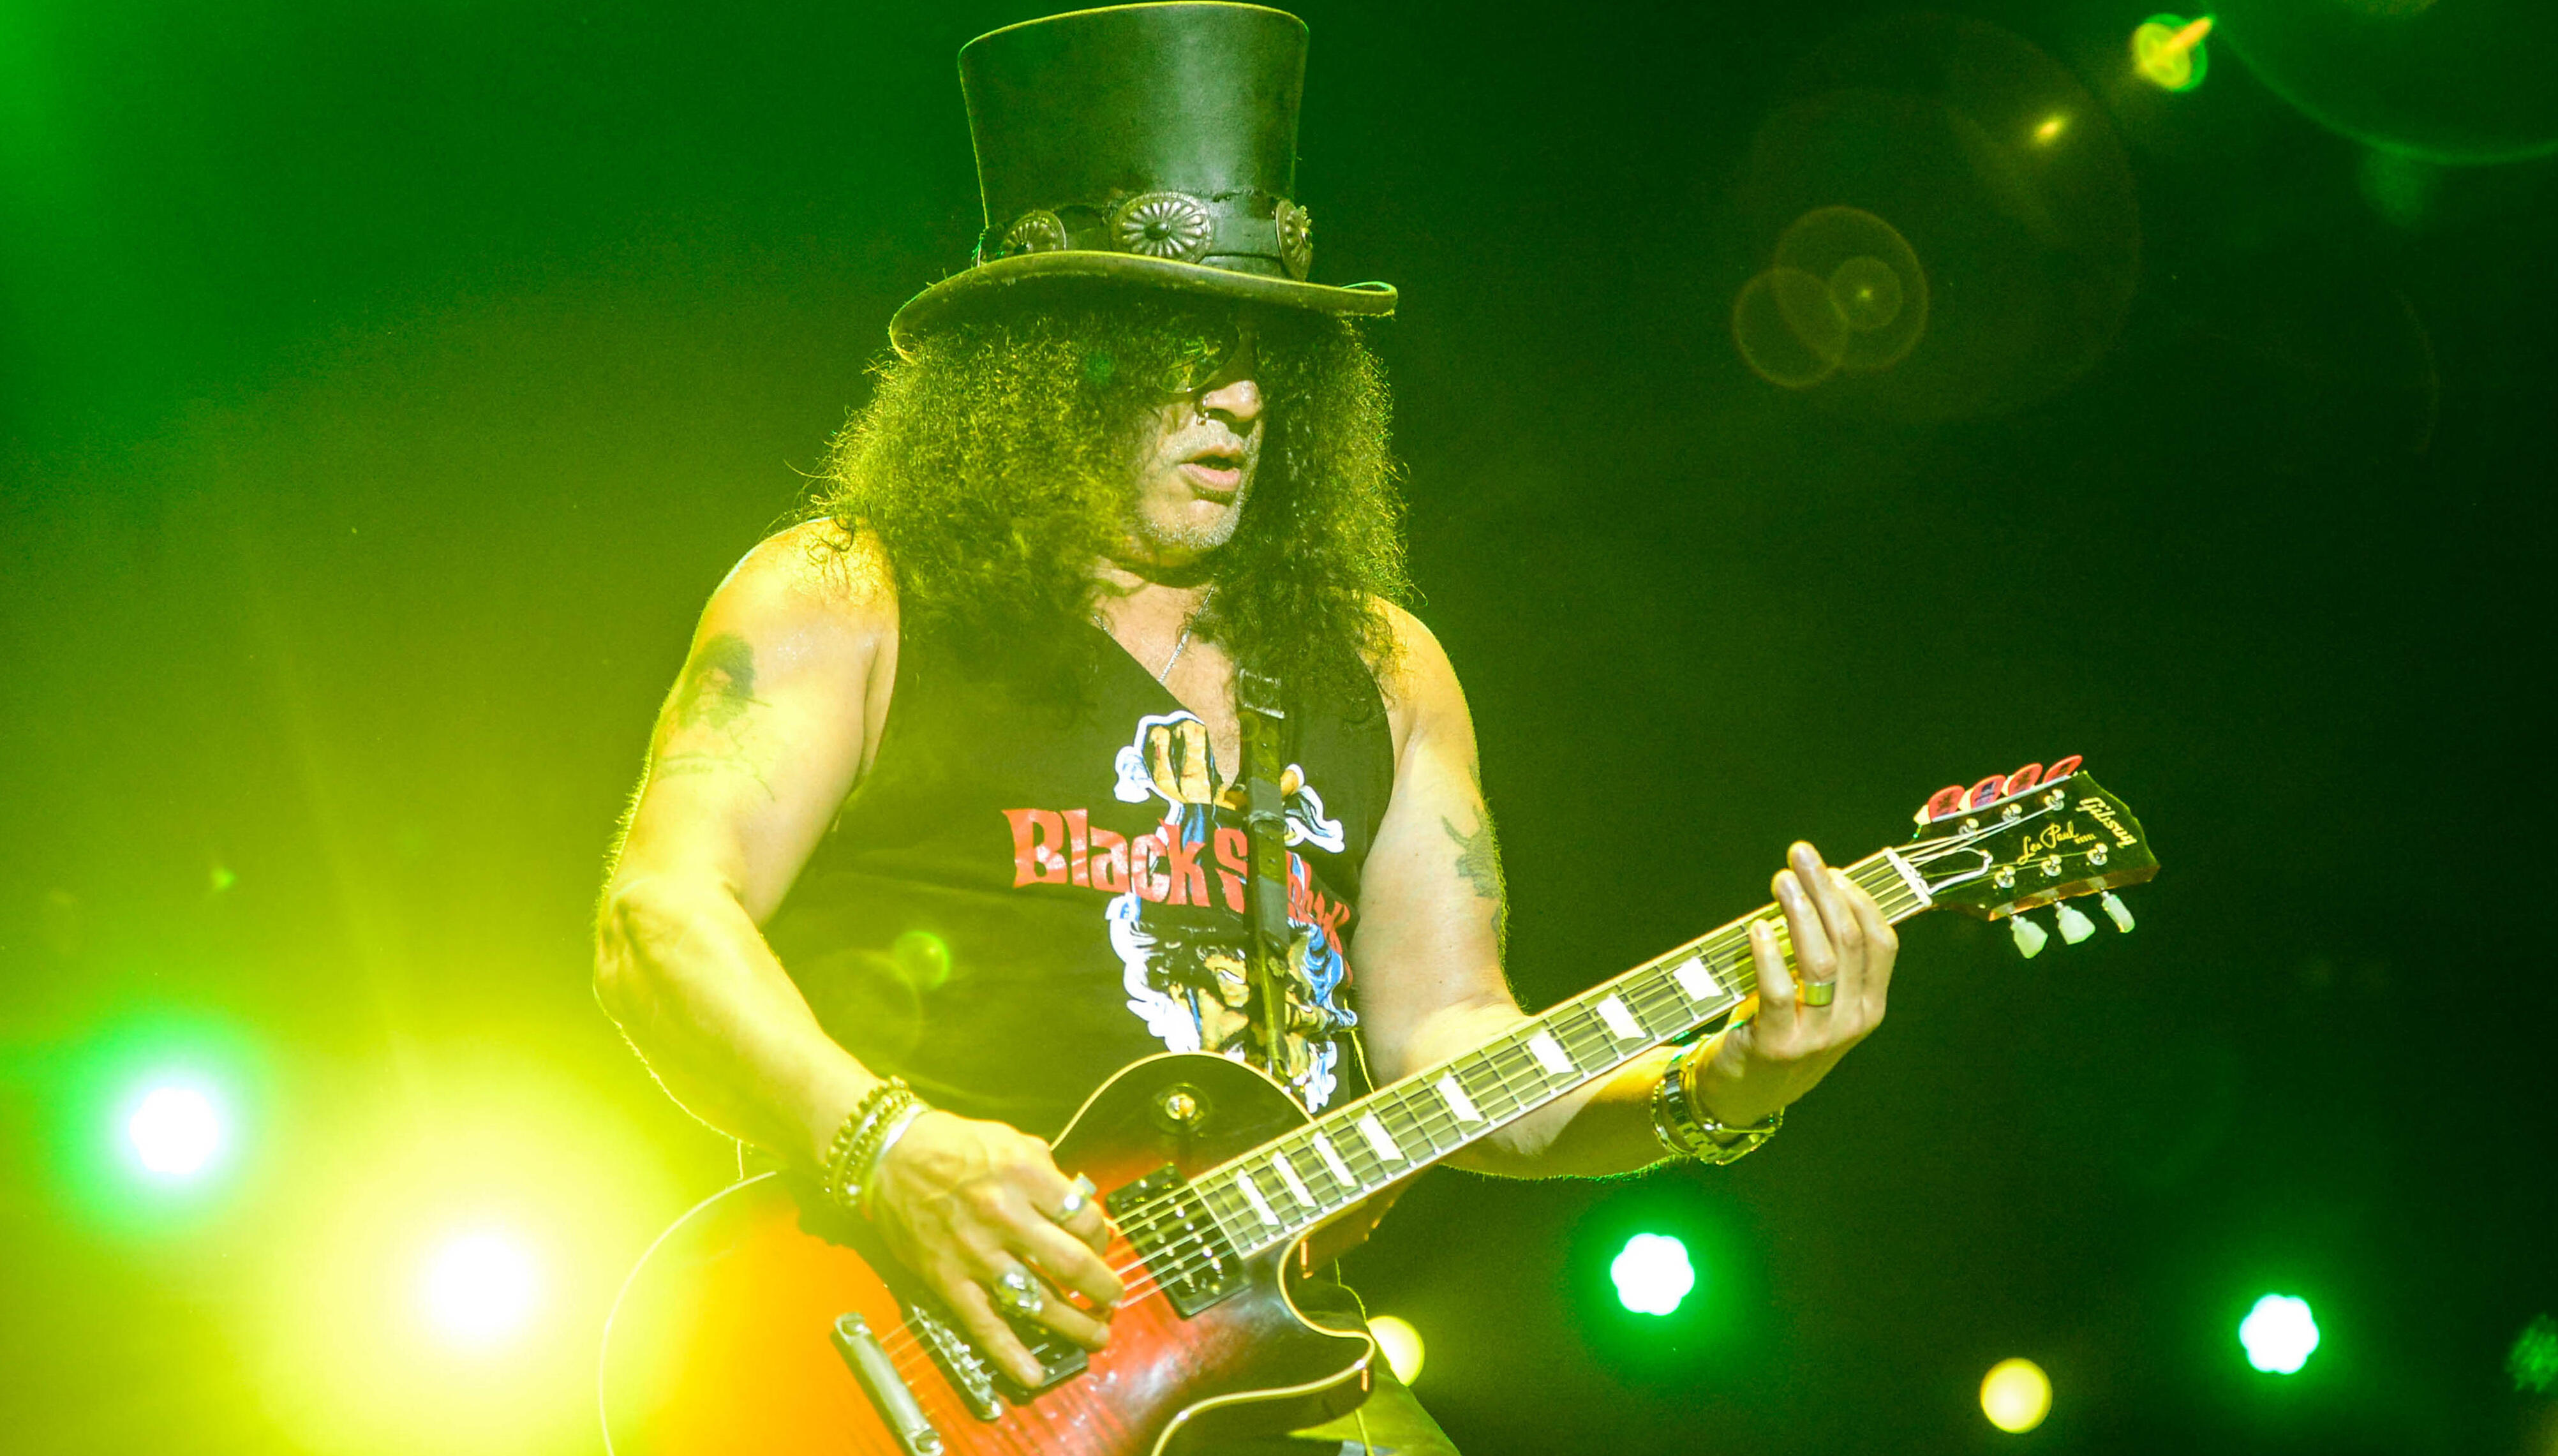 No new Guns N' Roses songs have been written, says Slash